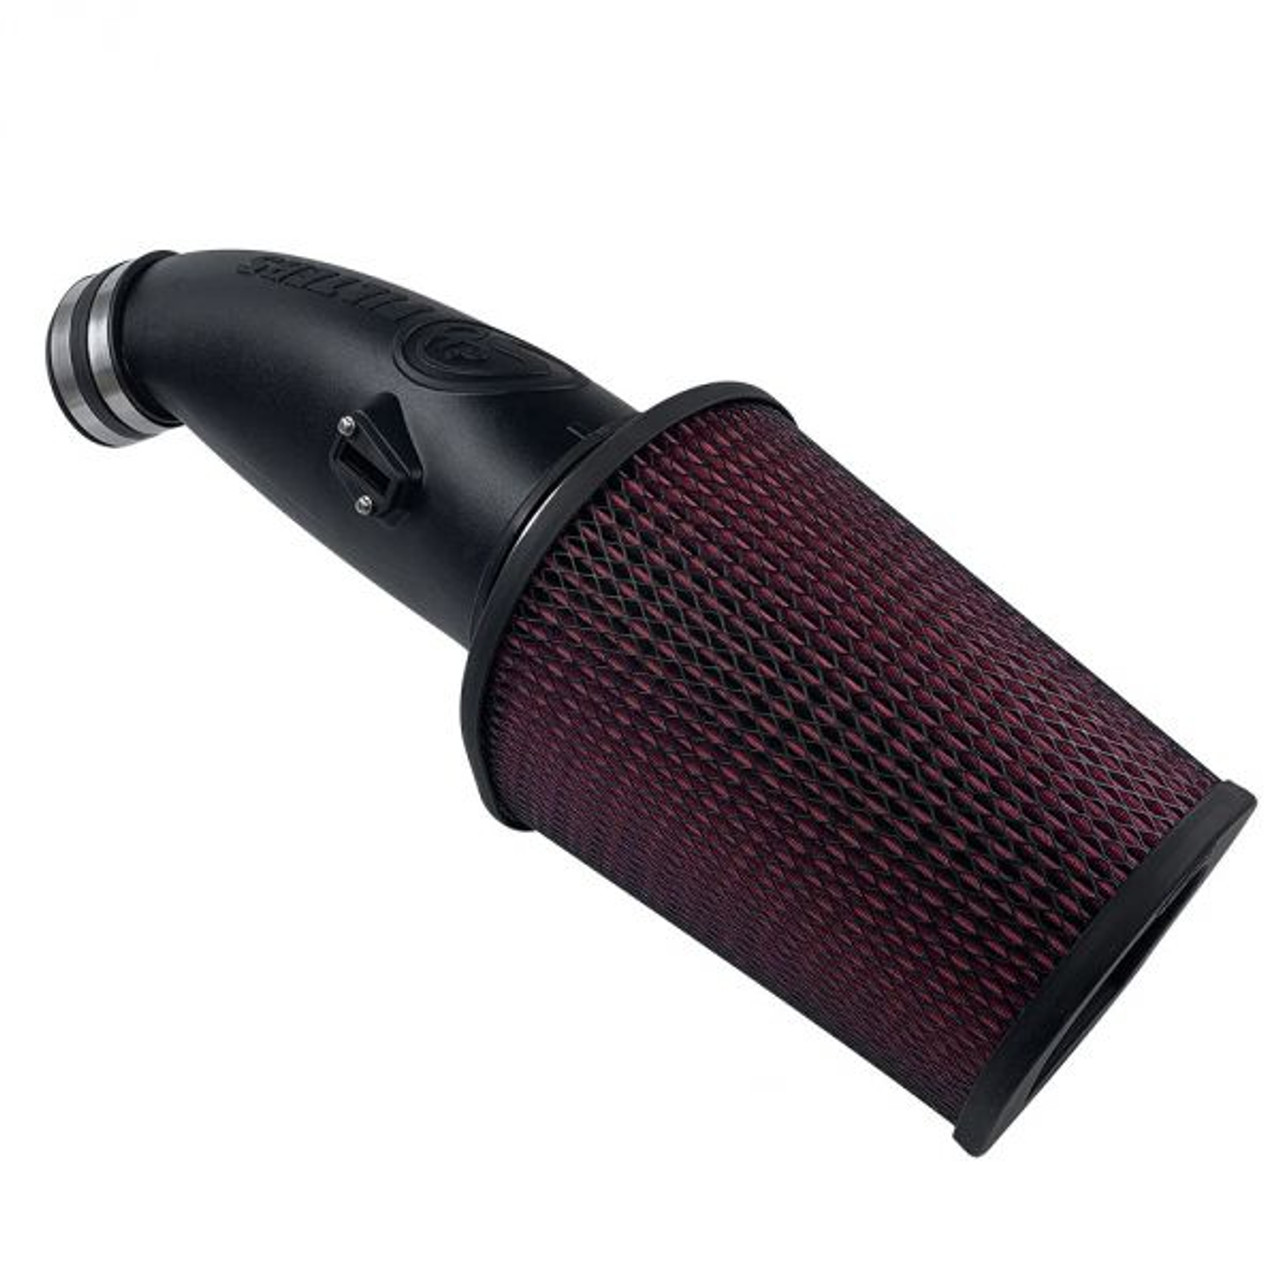 S&B Cold Air Intake For 2011-2016 Ford Powerstroke Diesel 6.7L F250 F350 Open Style - 75-6000